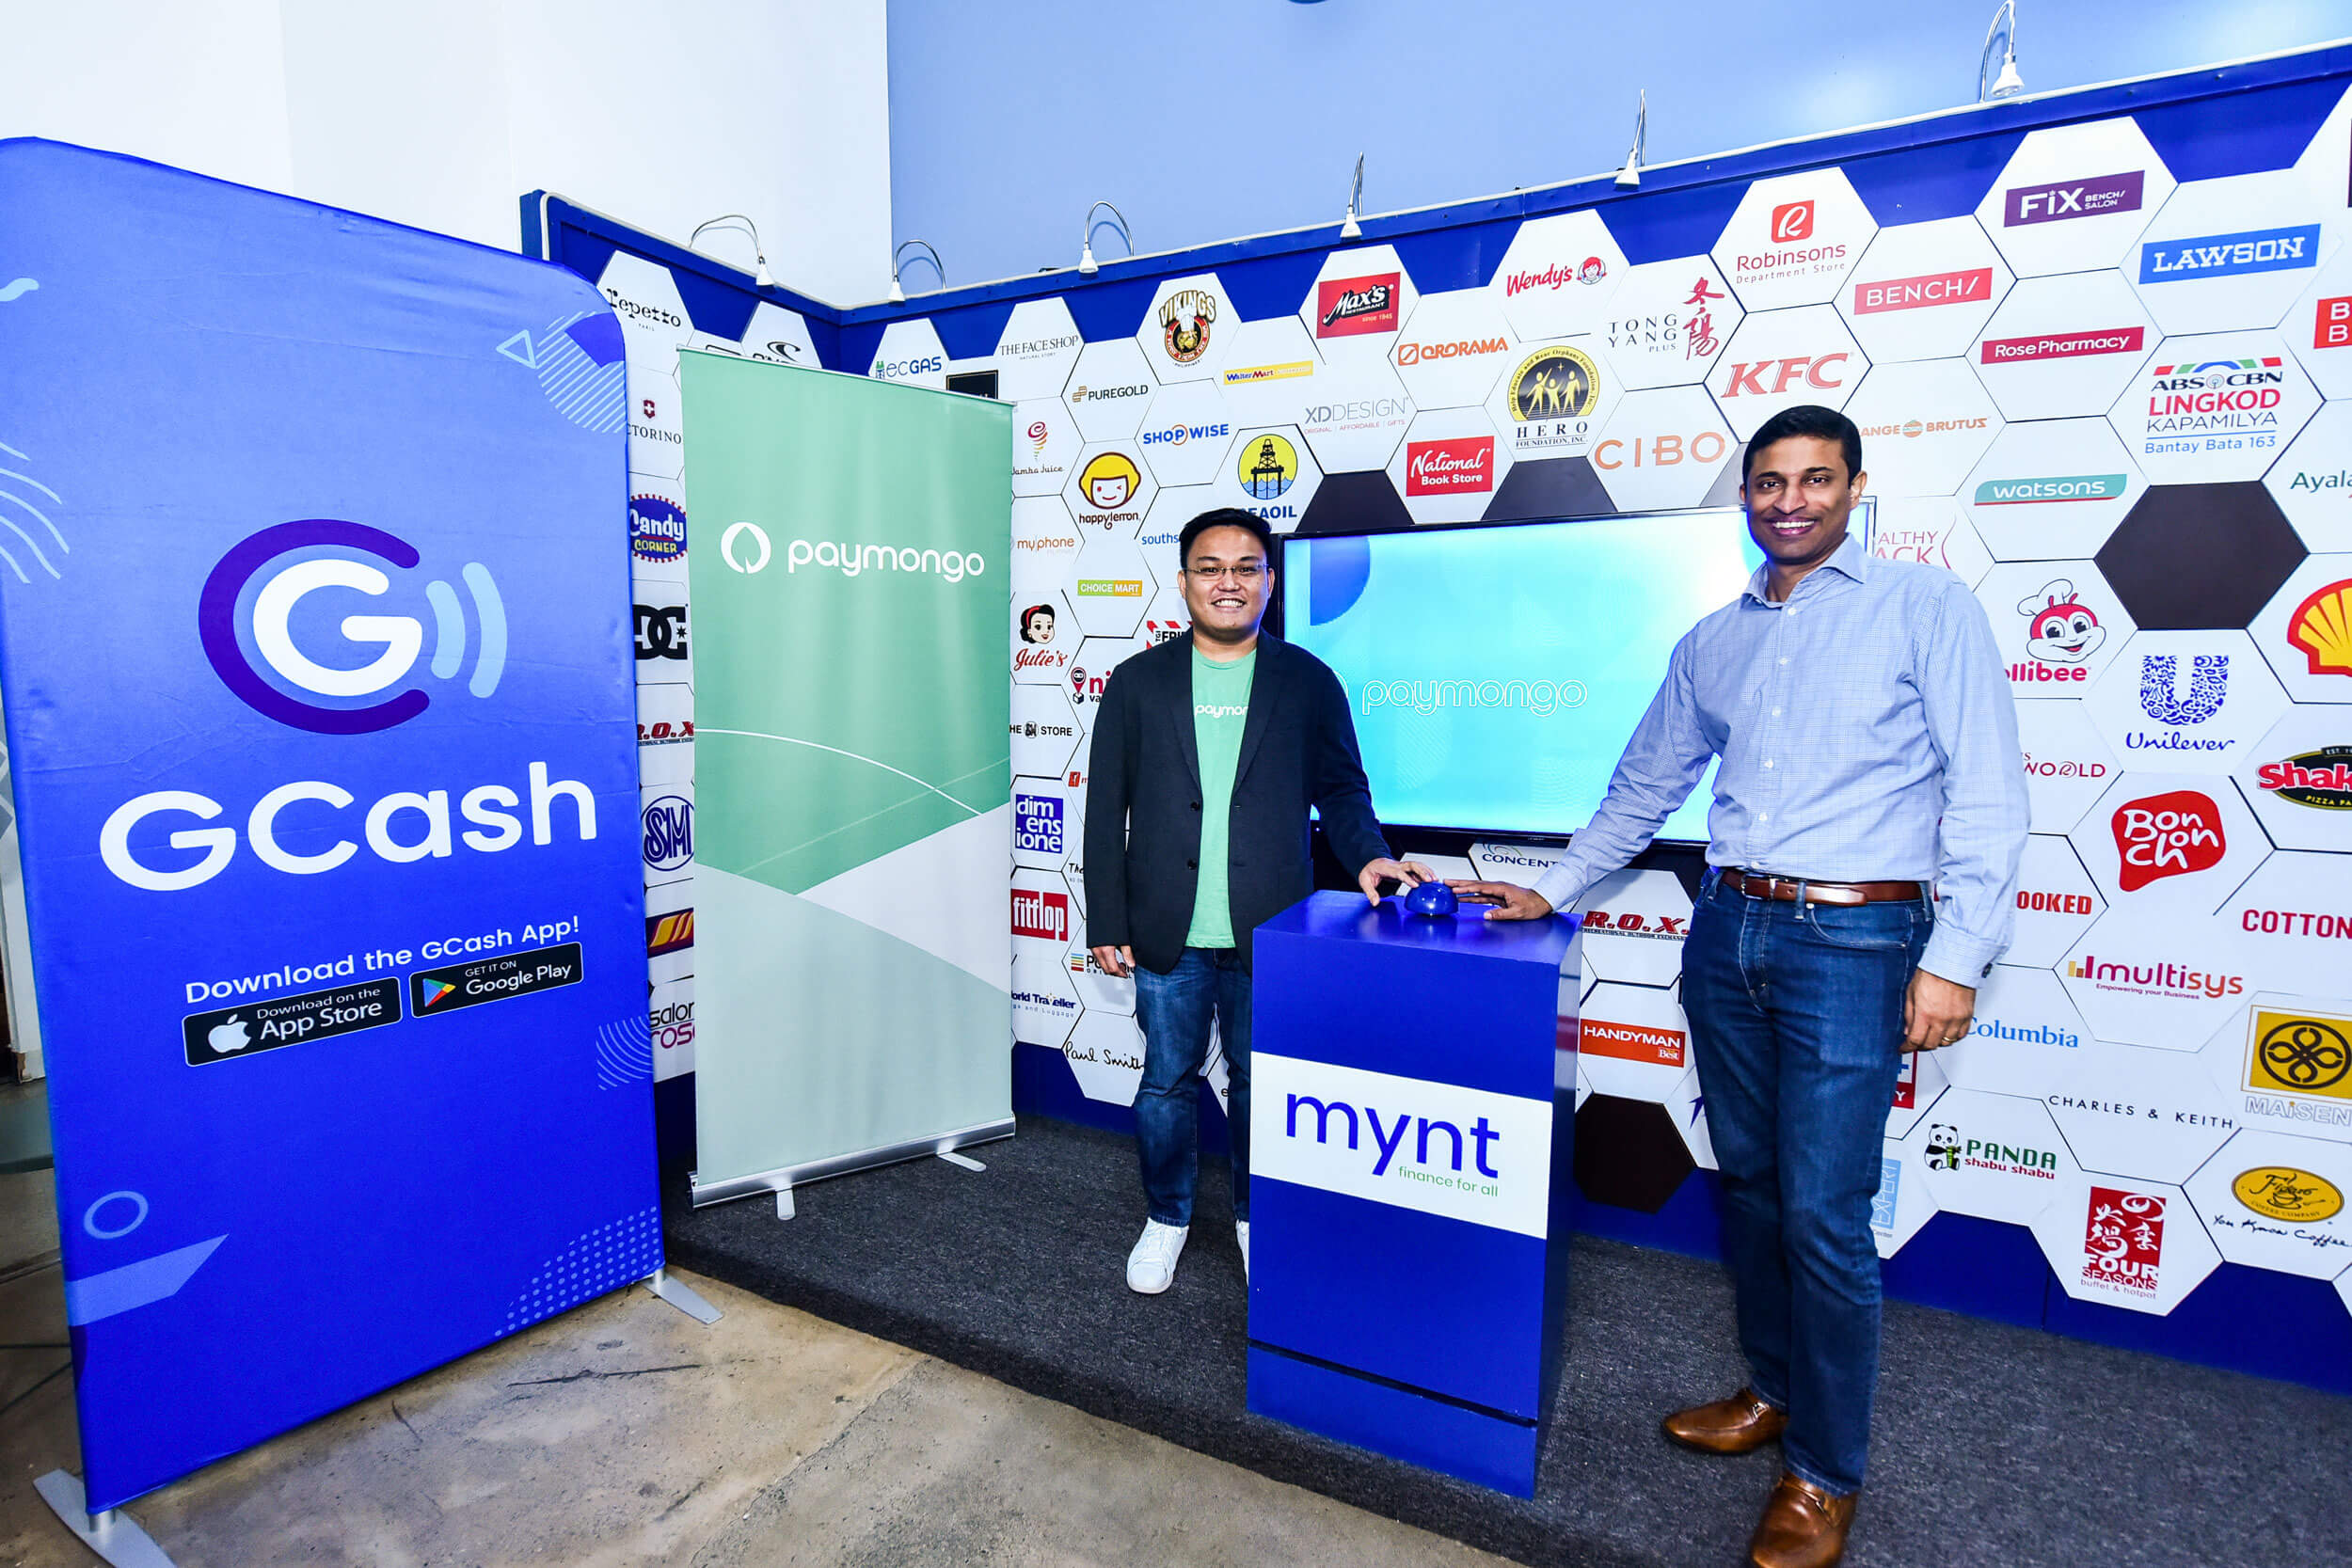 PARTNERSHIP. PayMongo Chief Executive Officer Francis Plaza and GCash President and Chief Executive Officer Anthony Thomas. The two companies have partnered to provide an expanded mobile payments platform for MSMEs in the country.